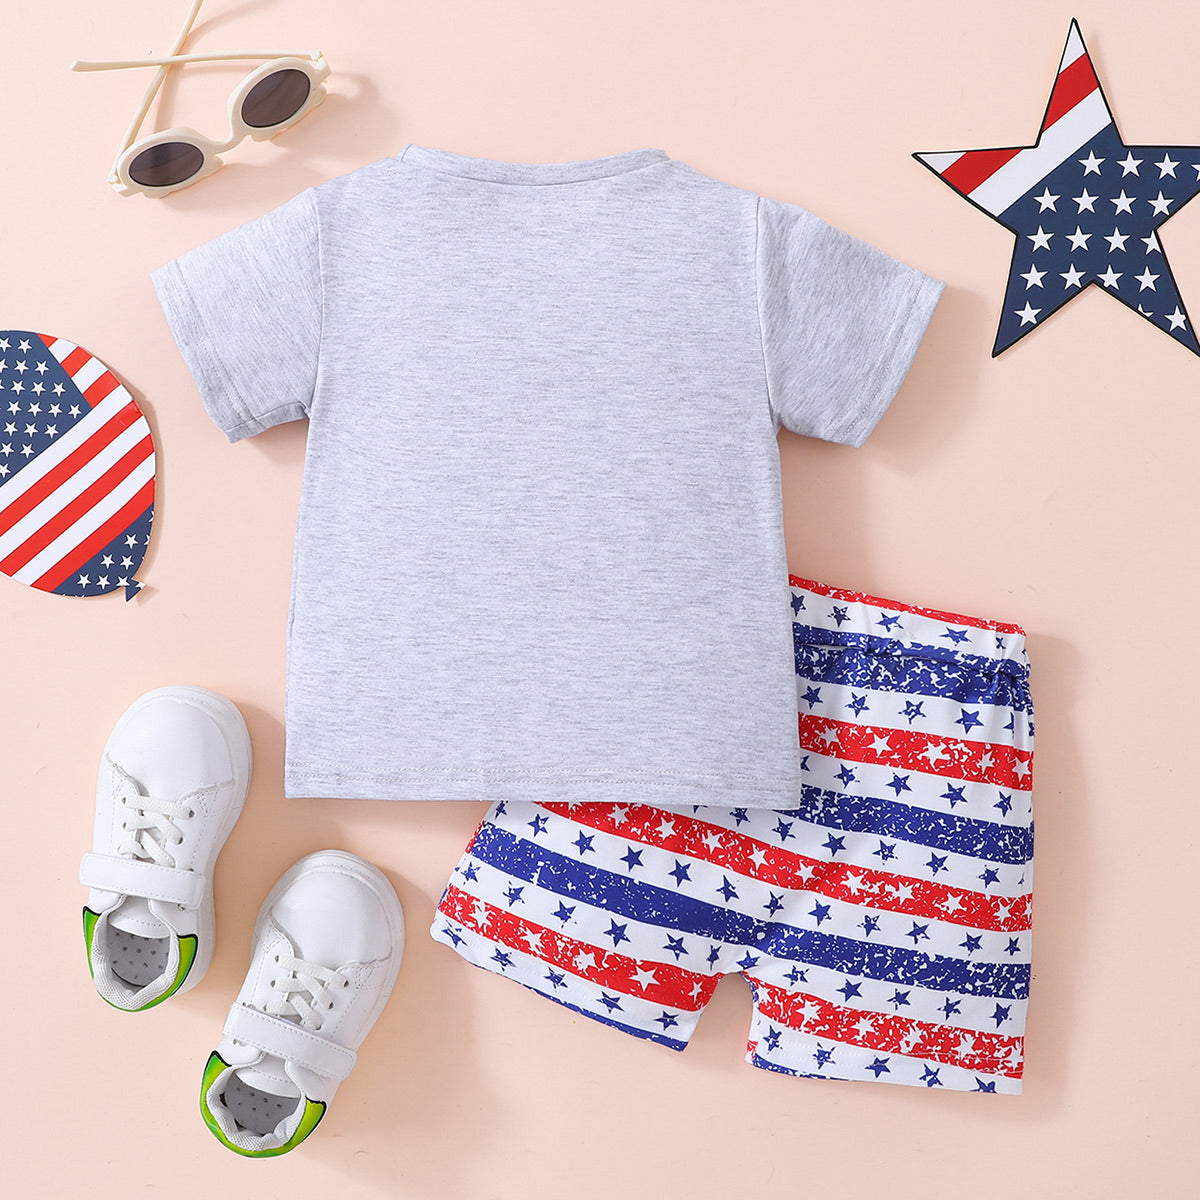 Kids USA Graphic Tee and Star and Stripe Shorts Set - ChildAngle